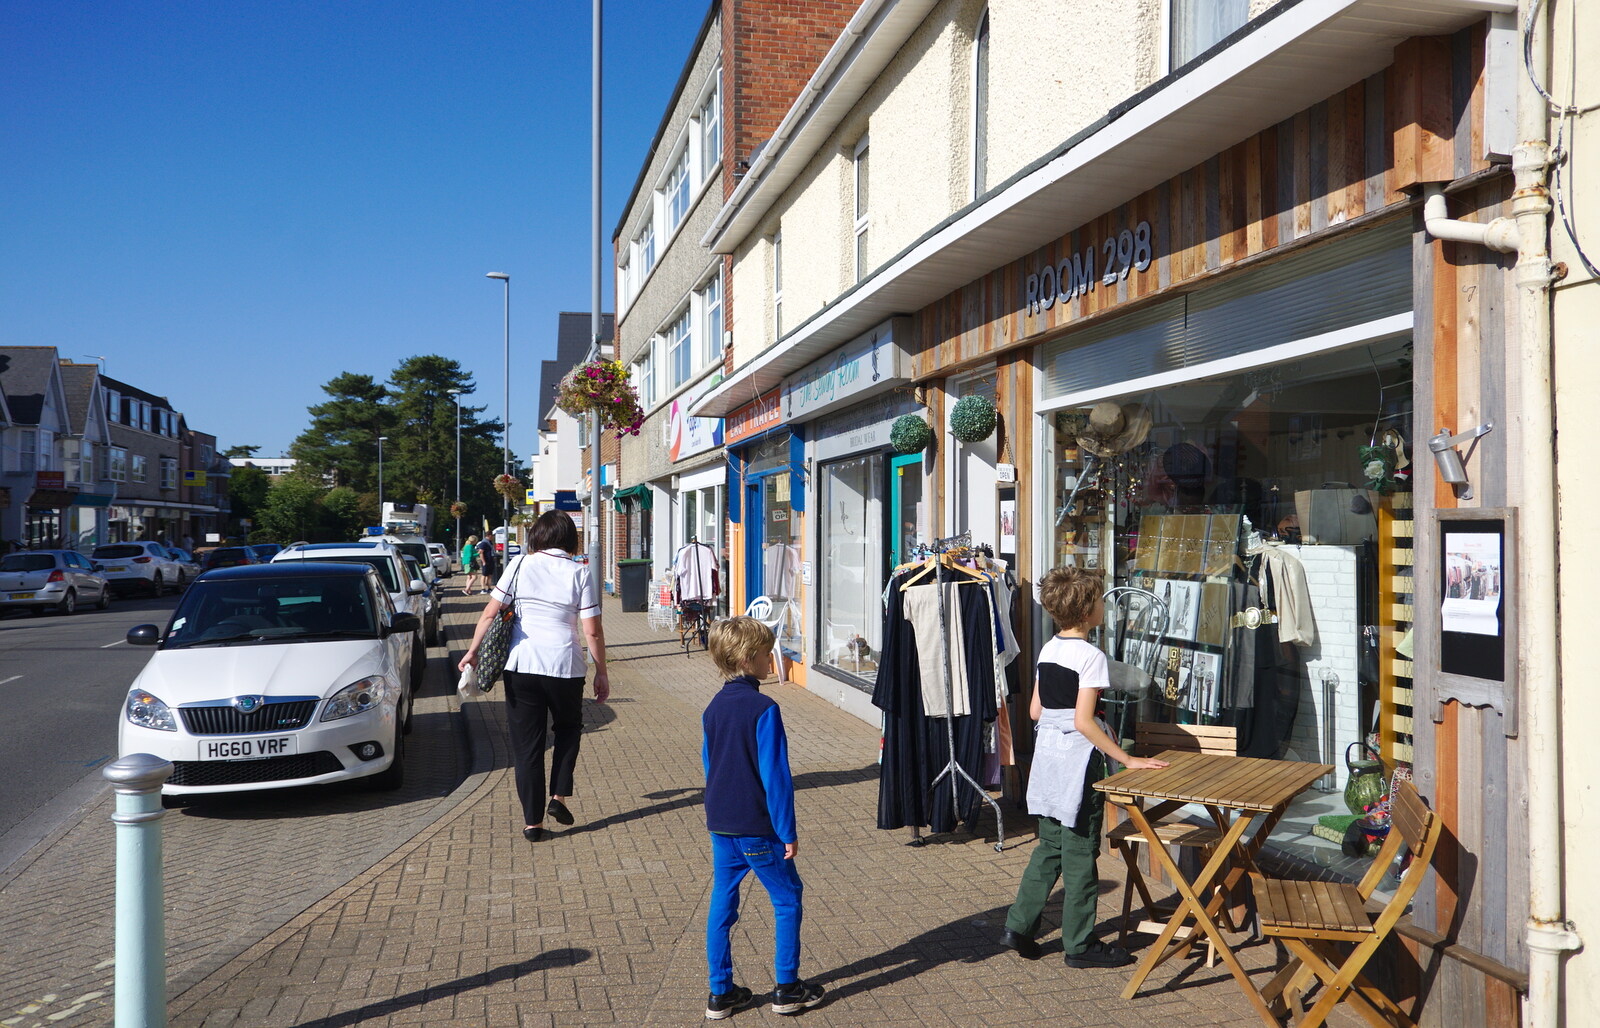 Harry looks at shops on Lymington Road from A Trip to the South Coast, Highcliffe, Dorset - 20th September 2019